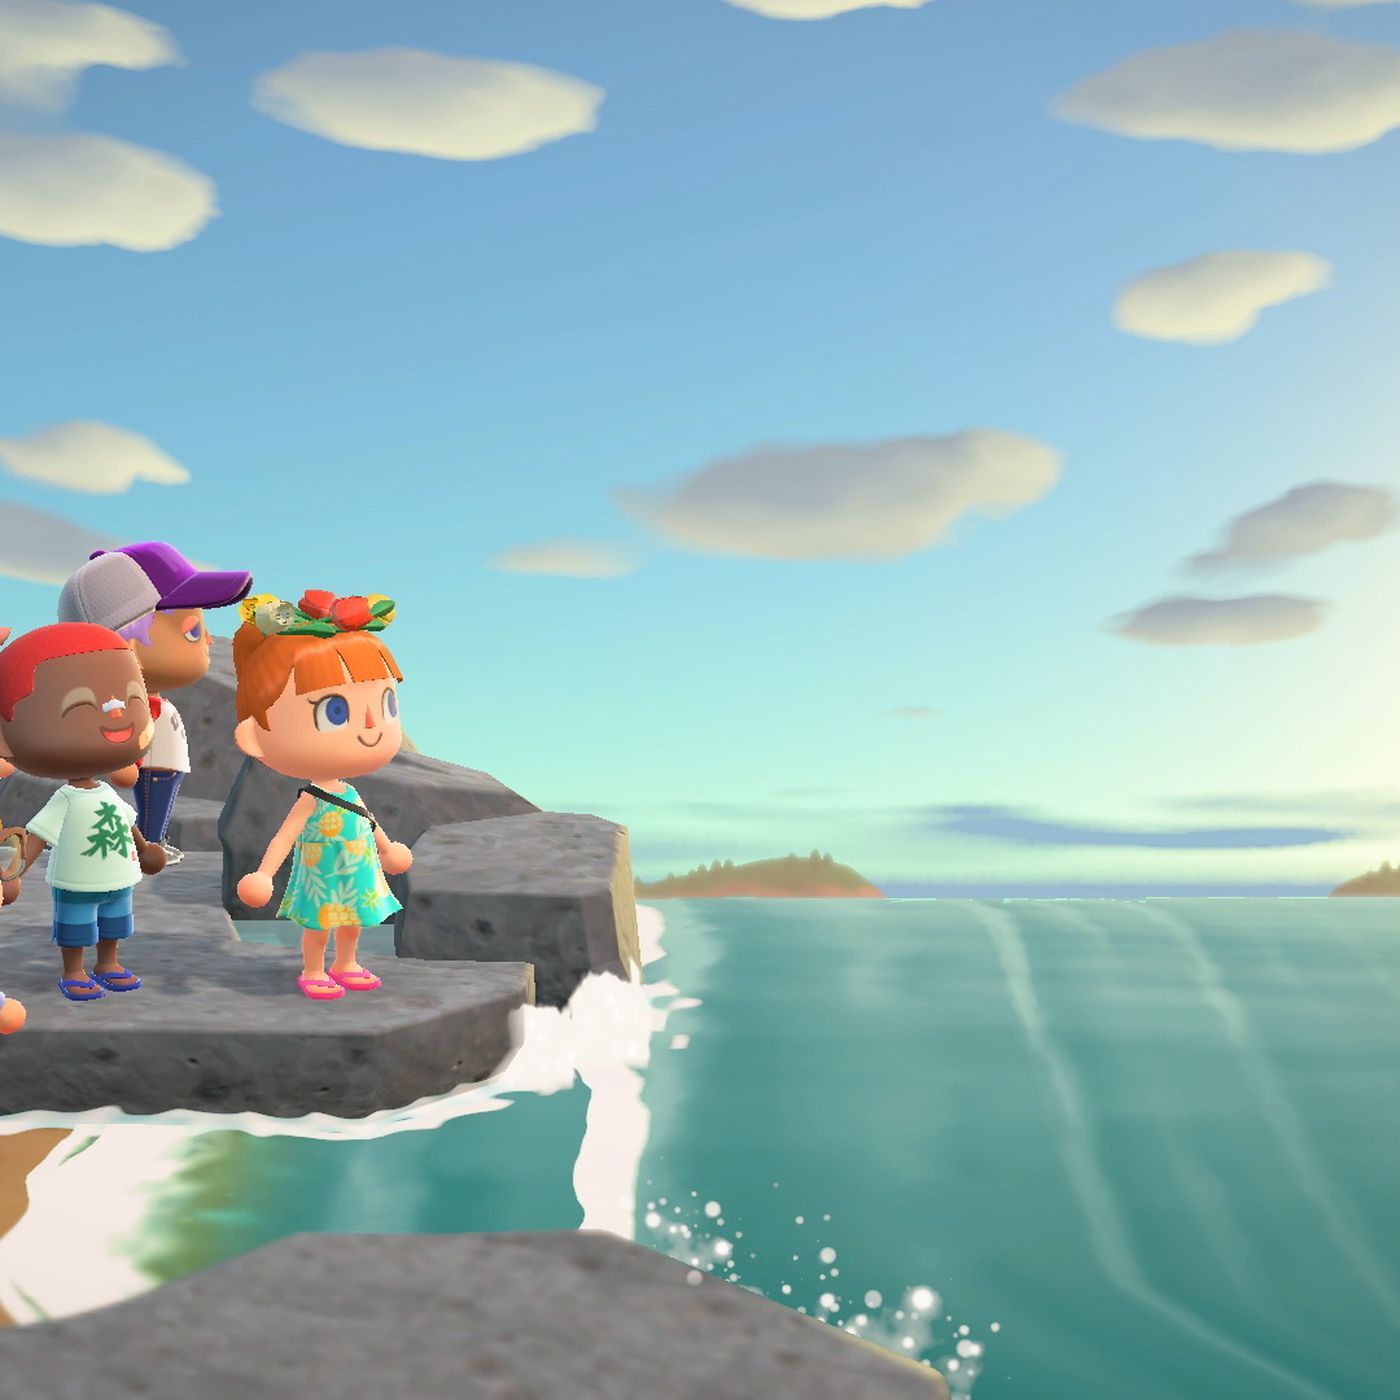 Animal Crossing: New Horizons includes skin tone options, gender